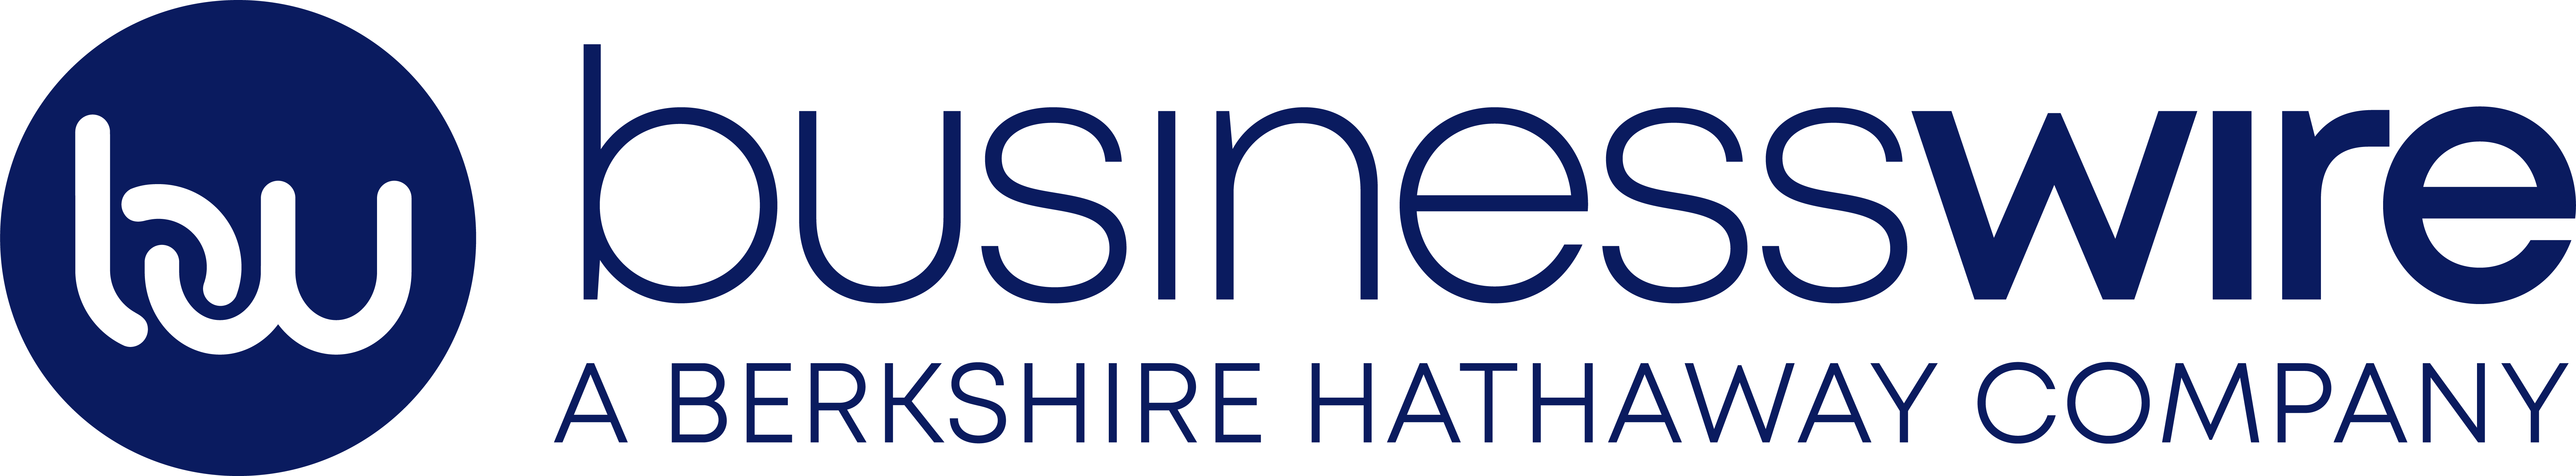 About - Business Wire Logo Small Navy